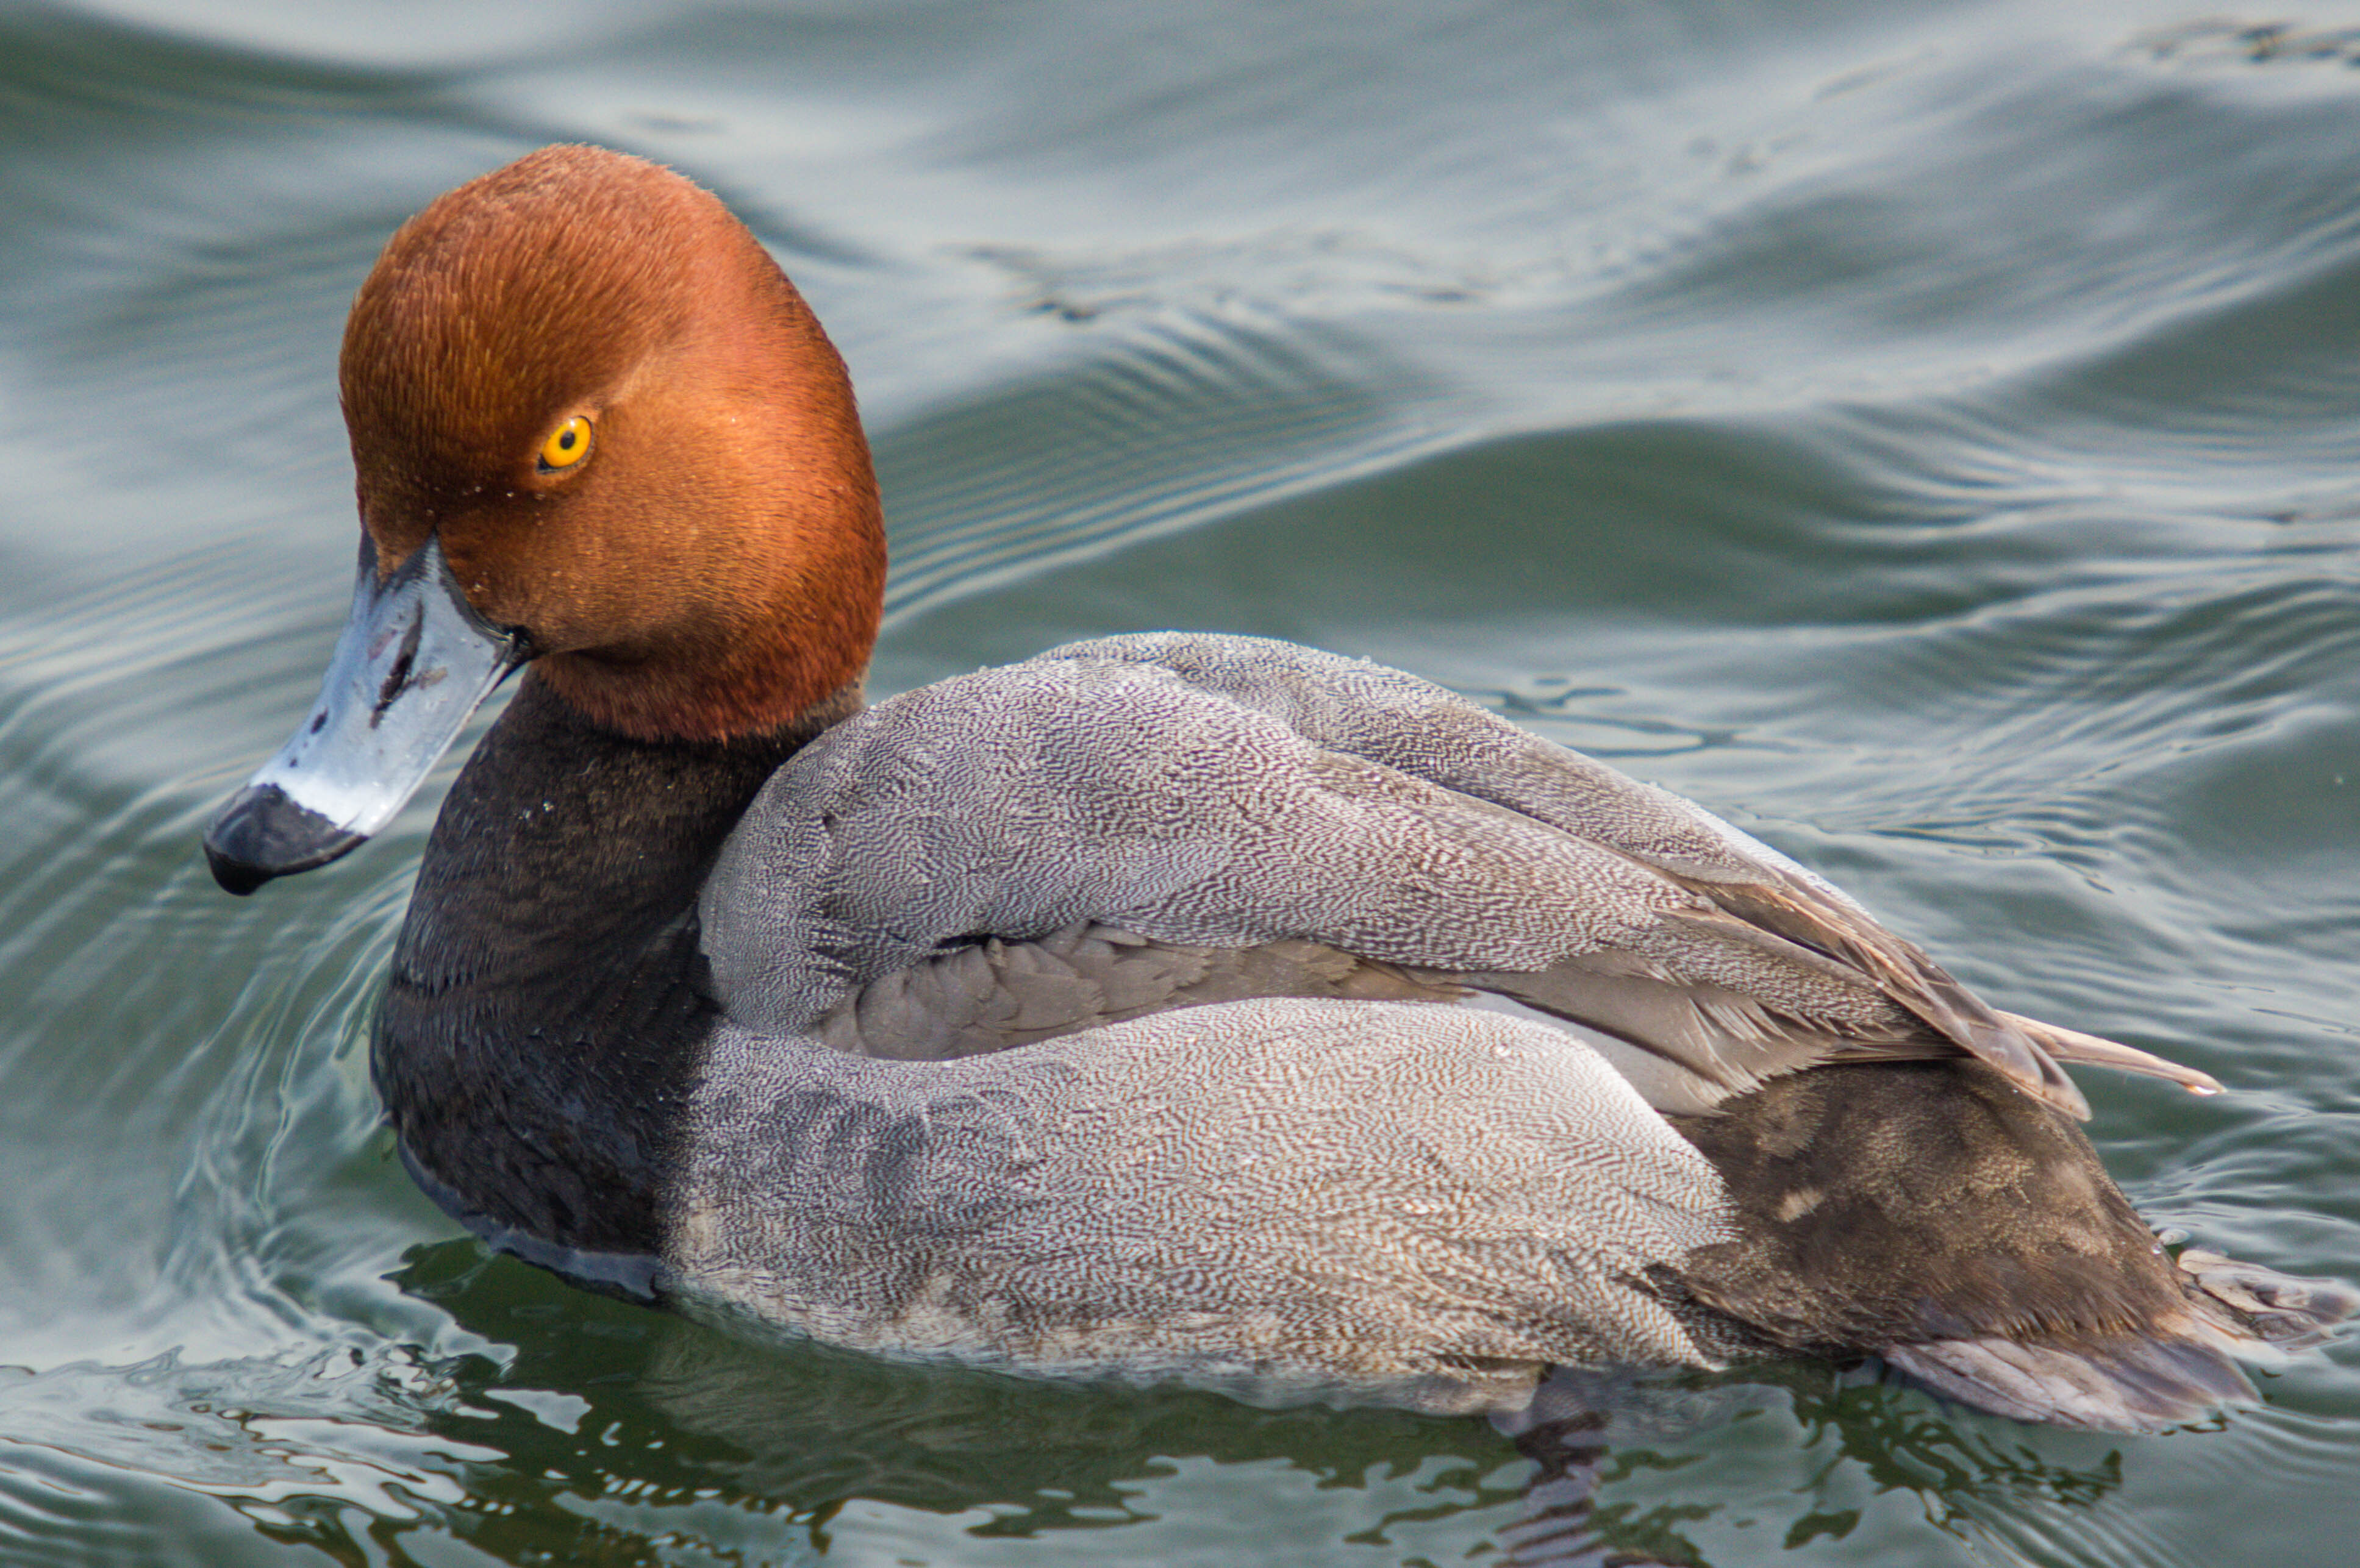 Seldom seen waterfowl like the Redhead can sometimes be seen fairly up close by the piers of Sheepshead Bay. Photo: Will Pollard/CC BY-ND 2.0